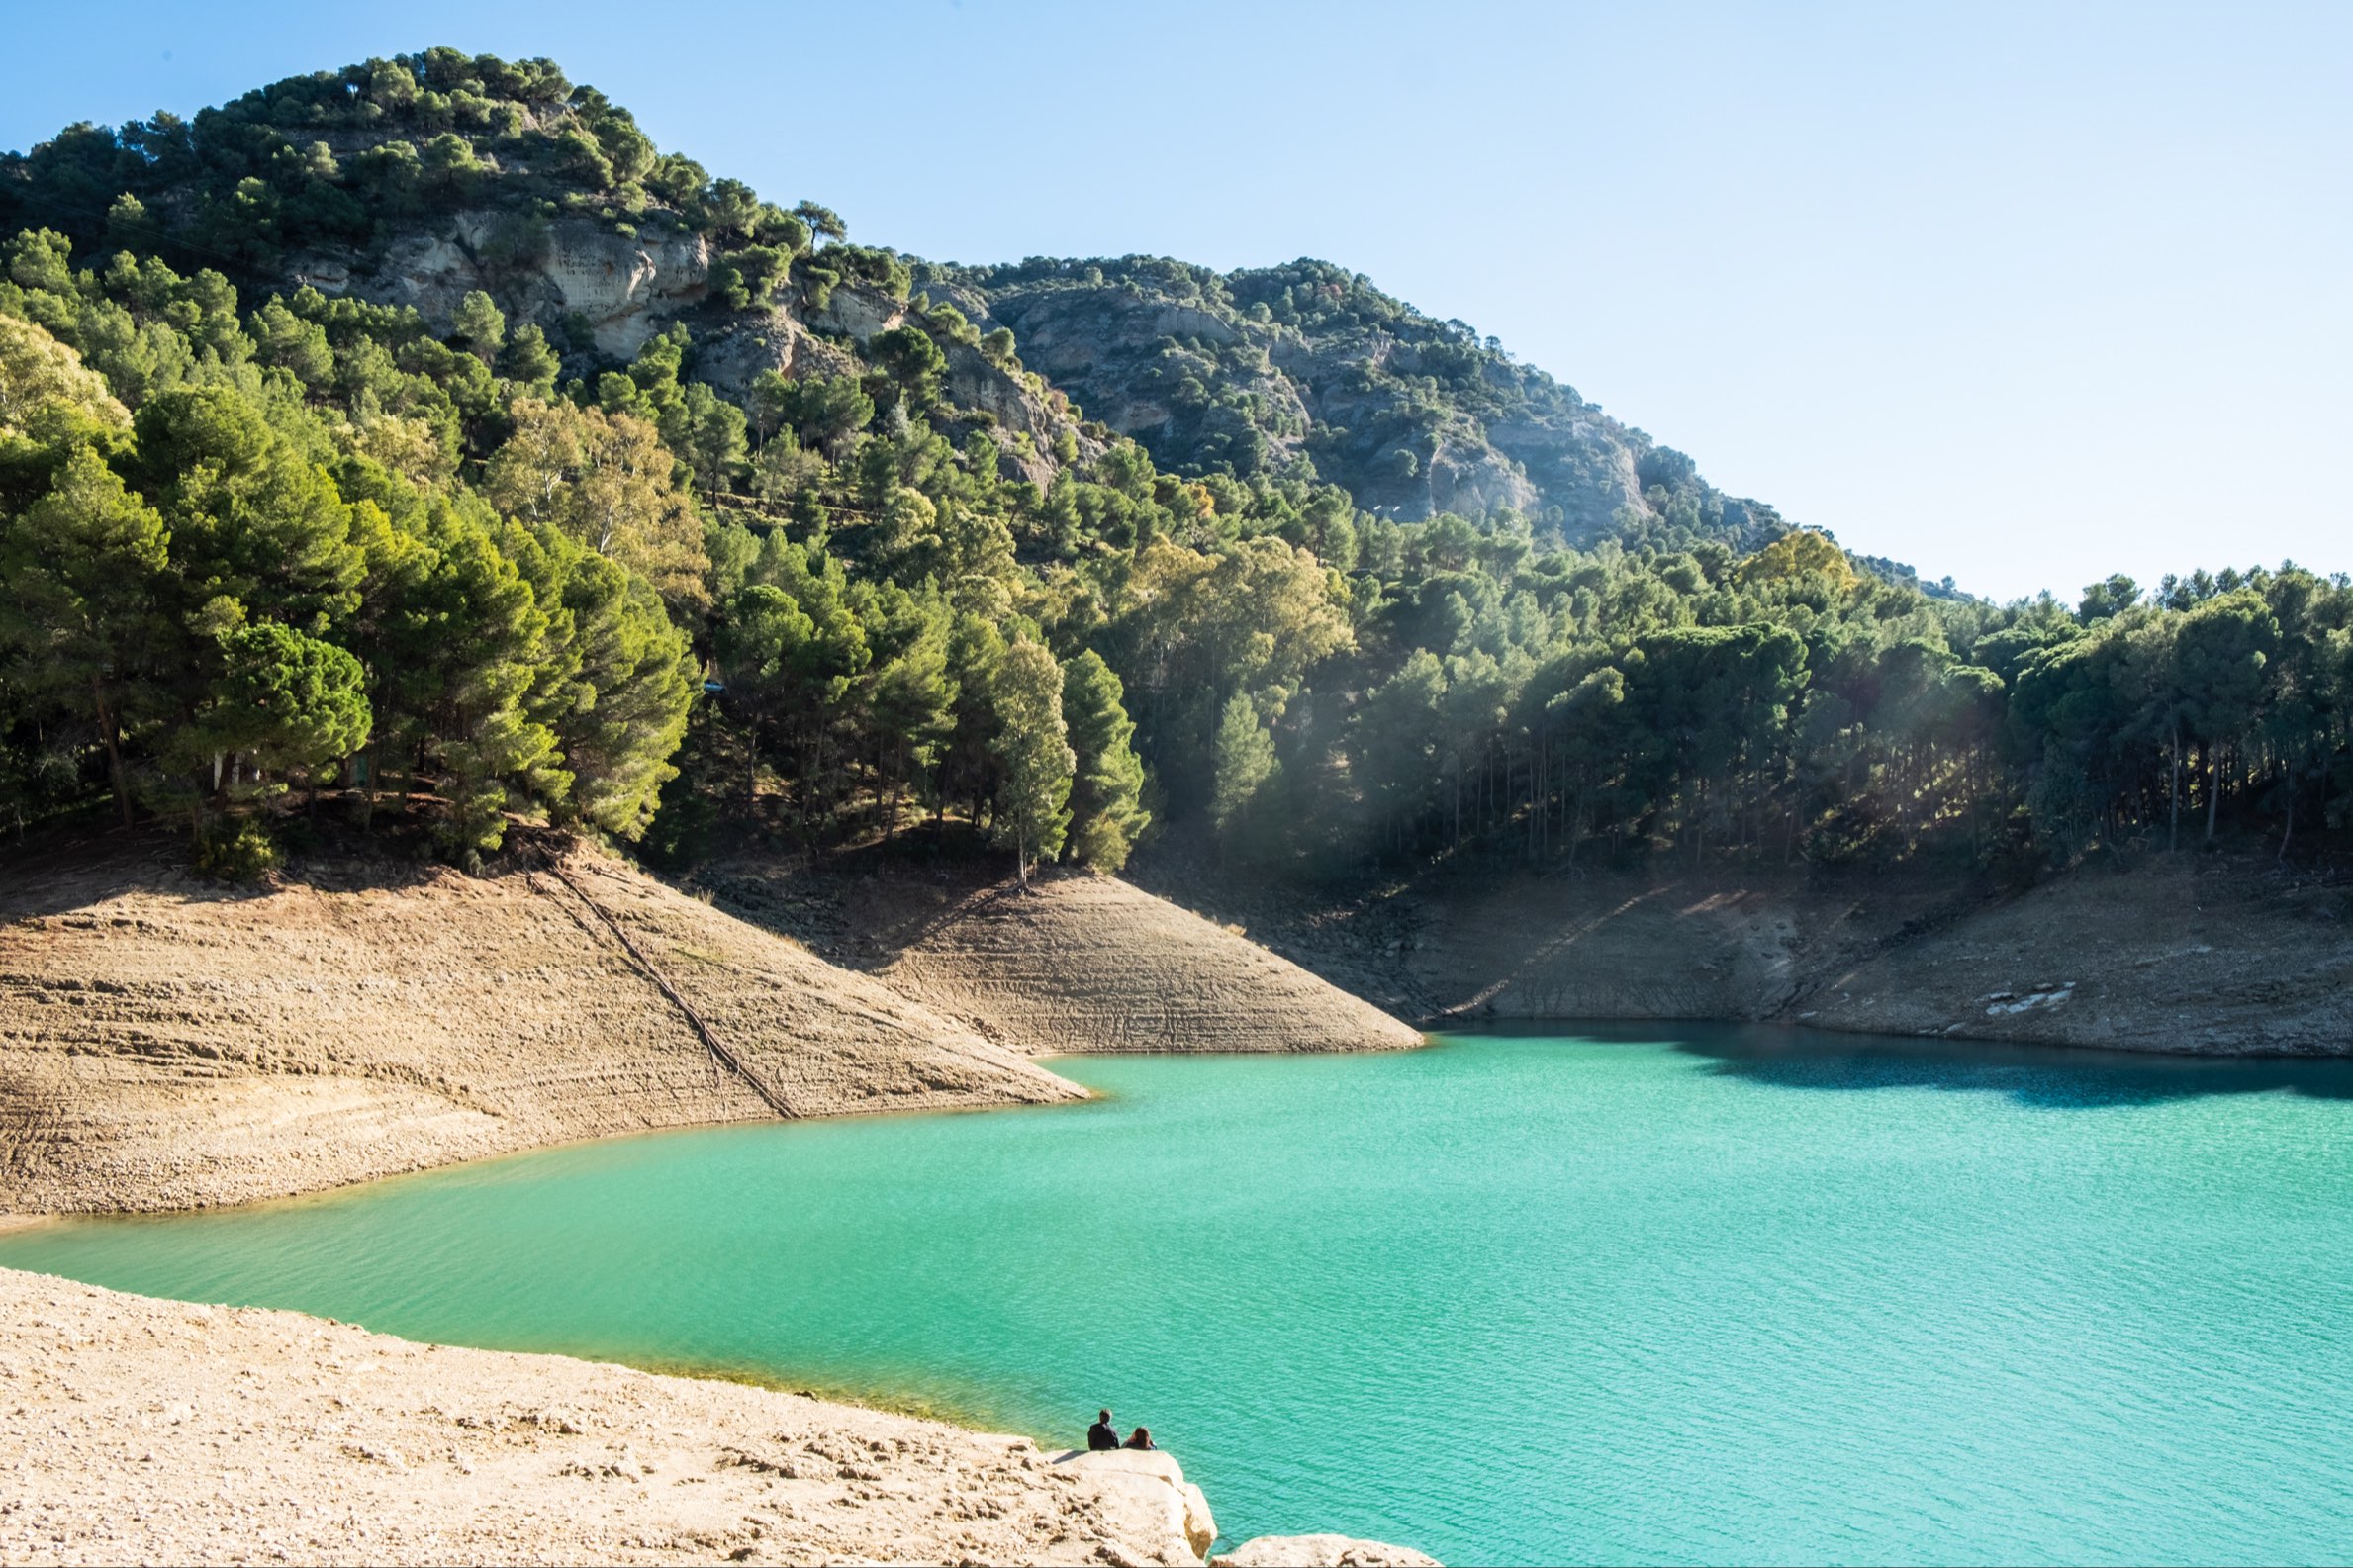 Guadalhorce reservoir with brilliant turquoise water